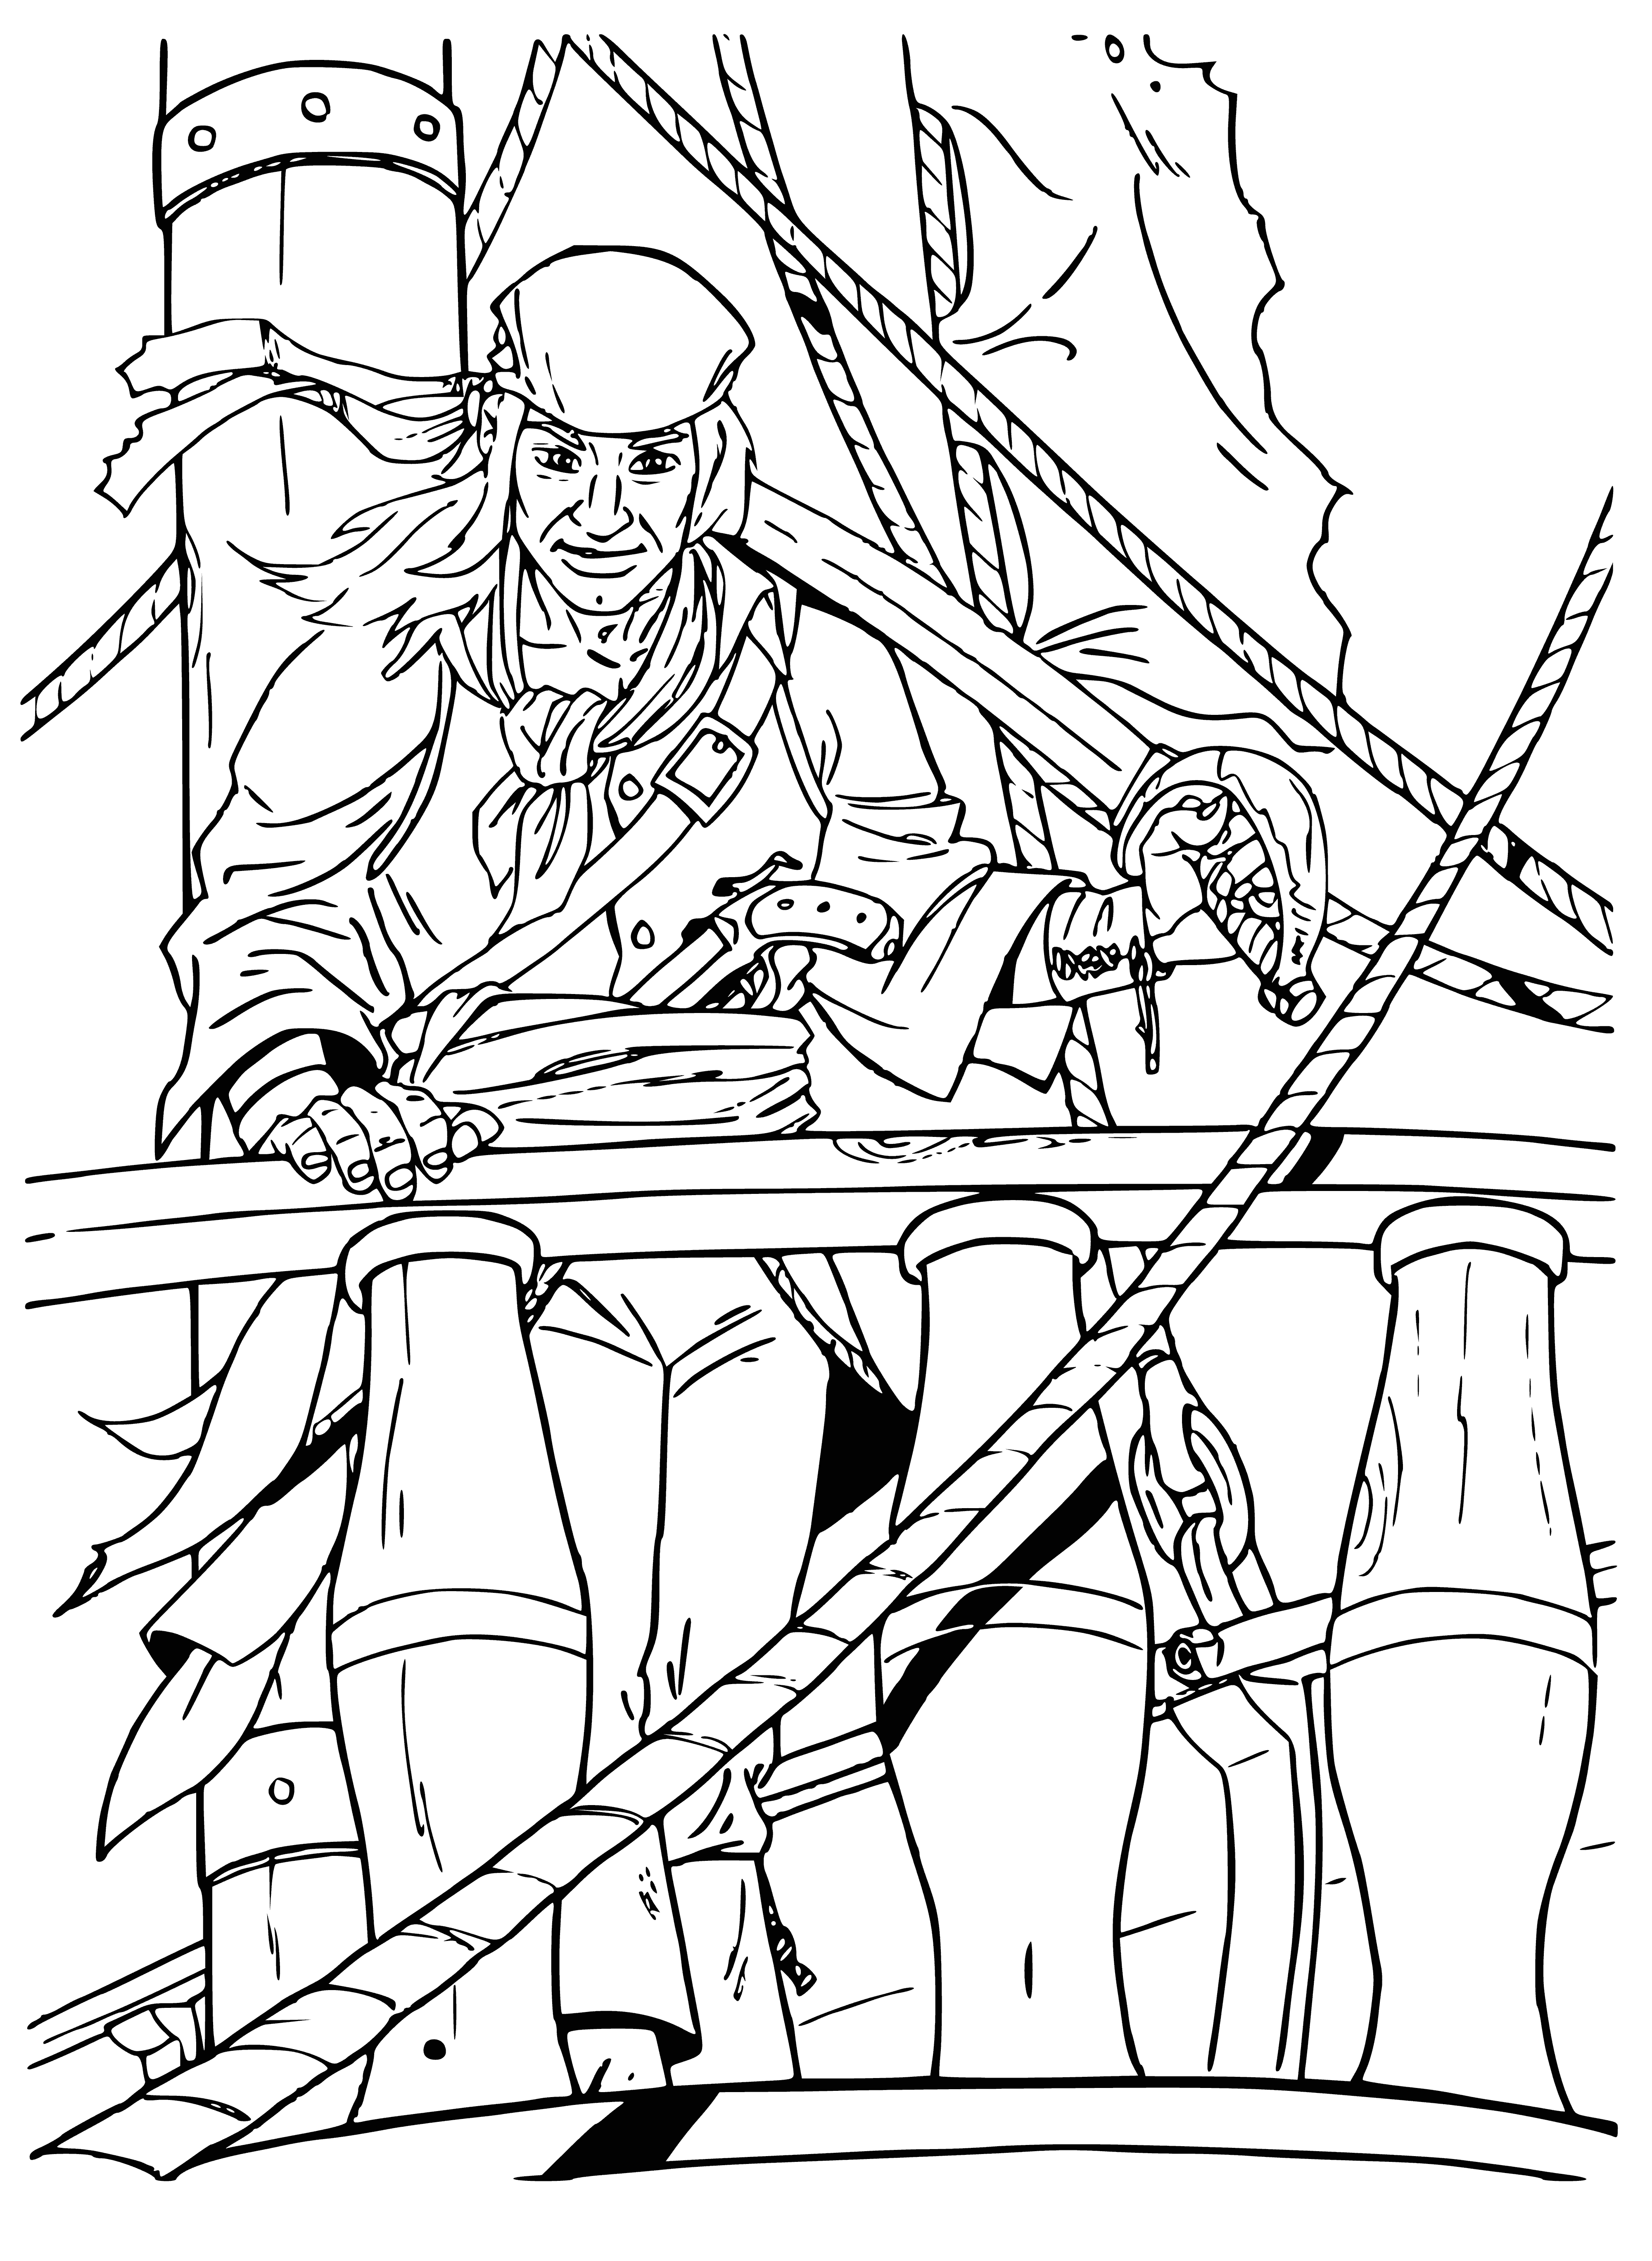 coloring page: A man stands with a flag, sword, pistol and coat, holding the future in his hands.